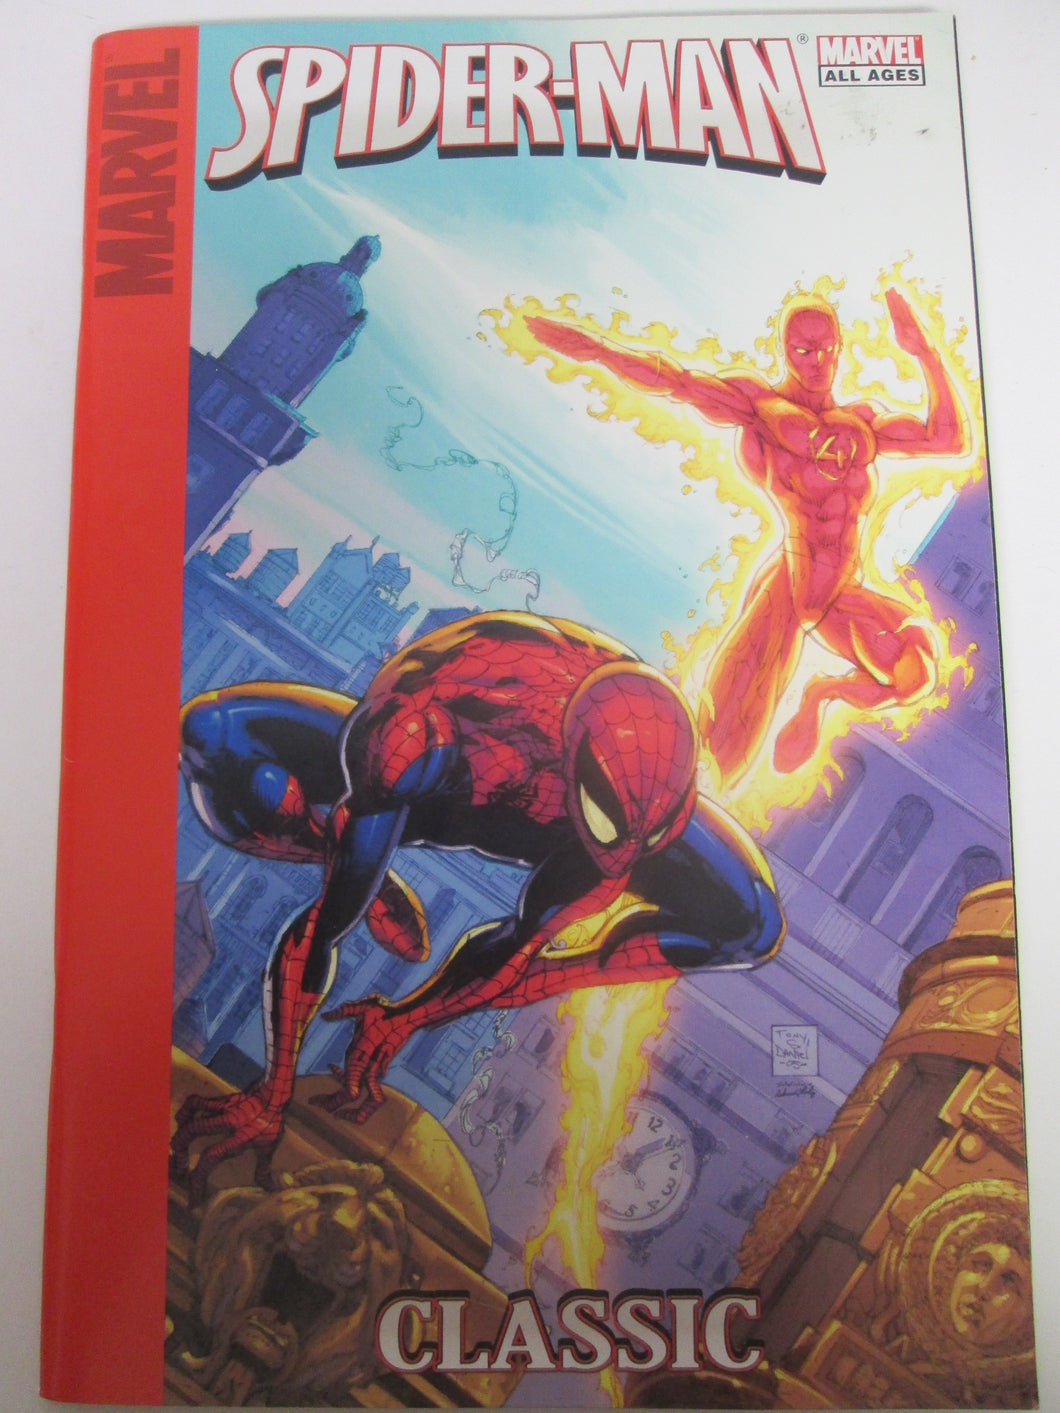 Target Spider-man Classic reprints Amazing Fantasy 15, Spider-Man 1-3 and Official Handbook of the Marvel Universe: Spider-Man 2006